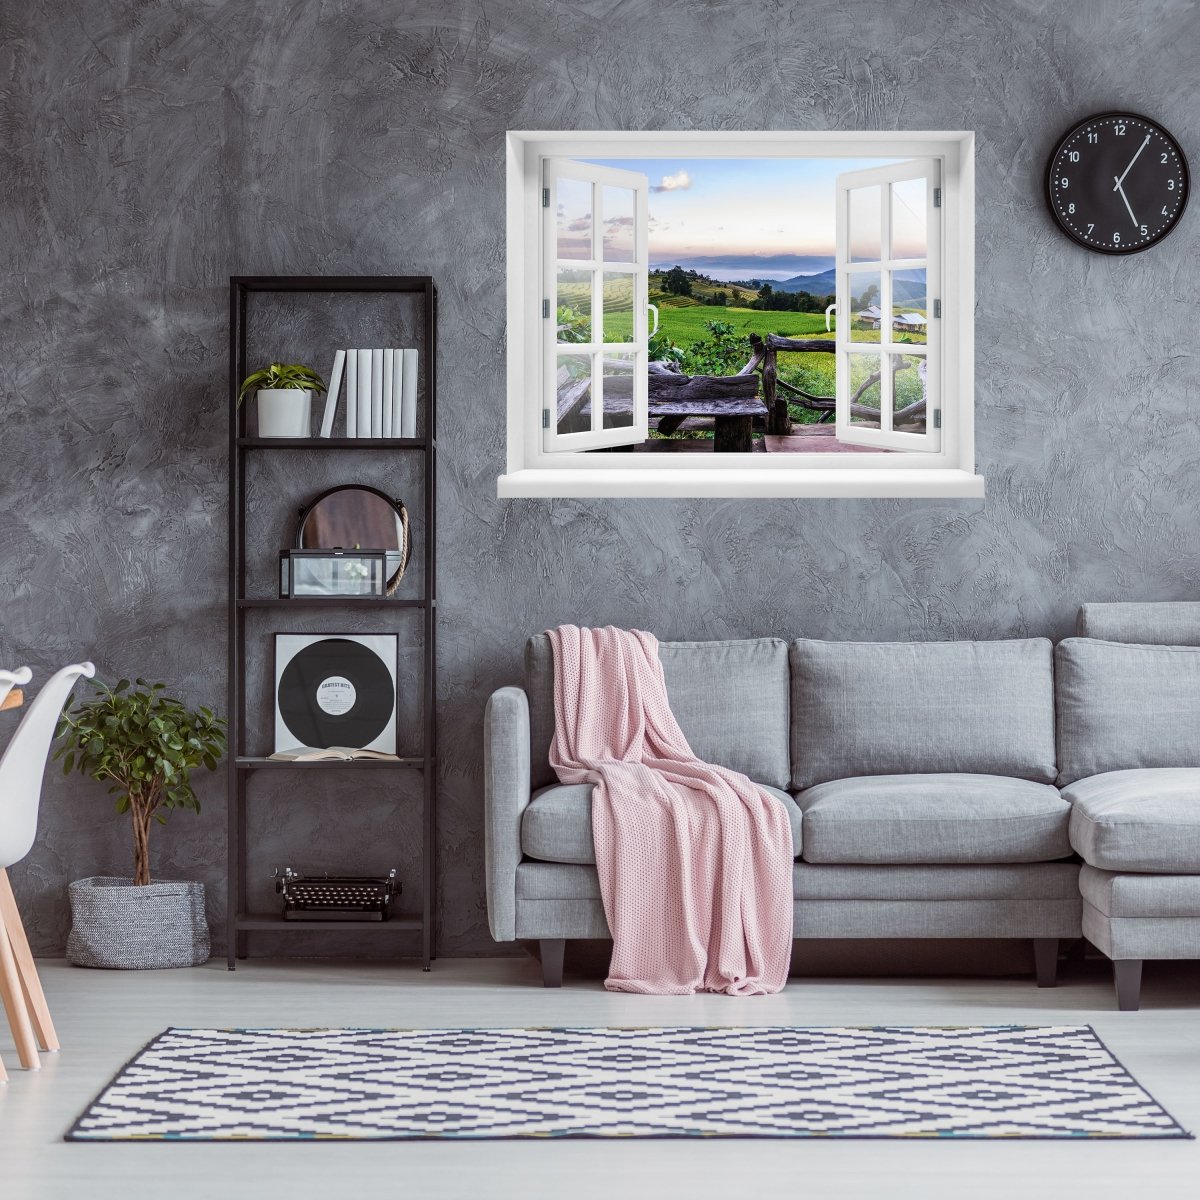 3D wall sticker rice fields in the mountains, mountains, Asia - wall decal M1208